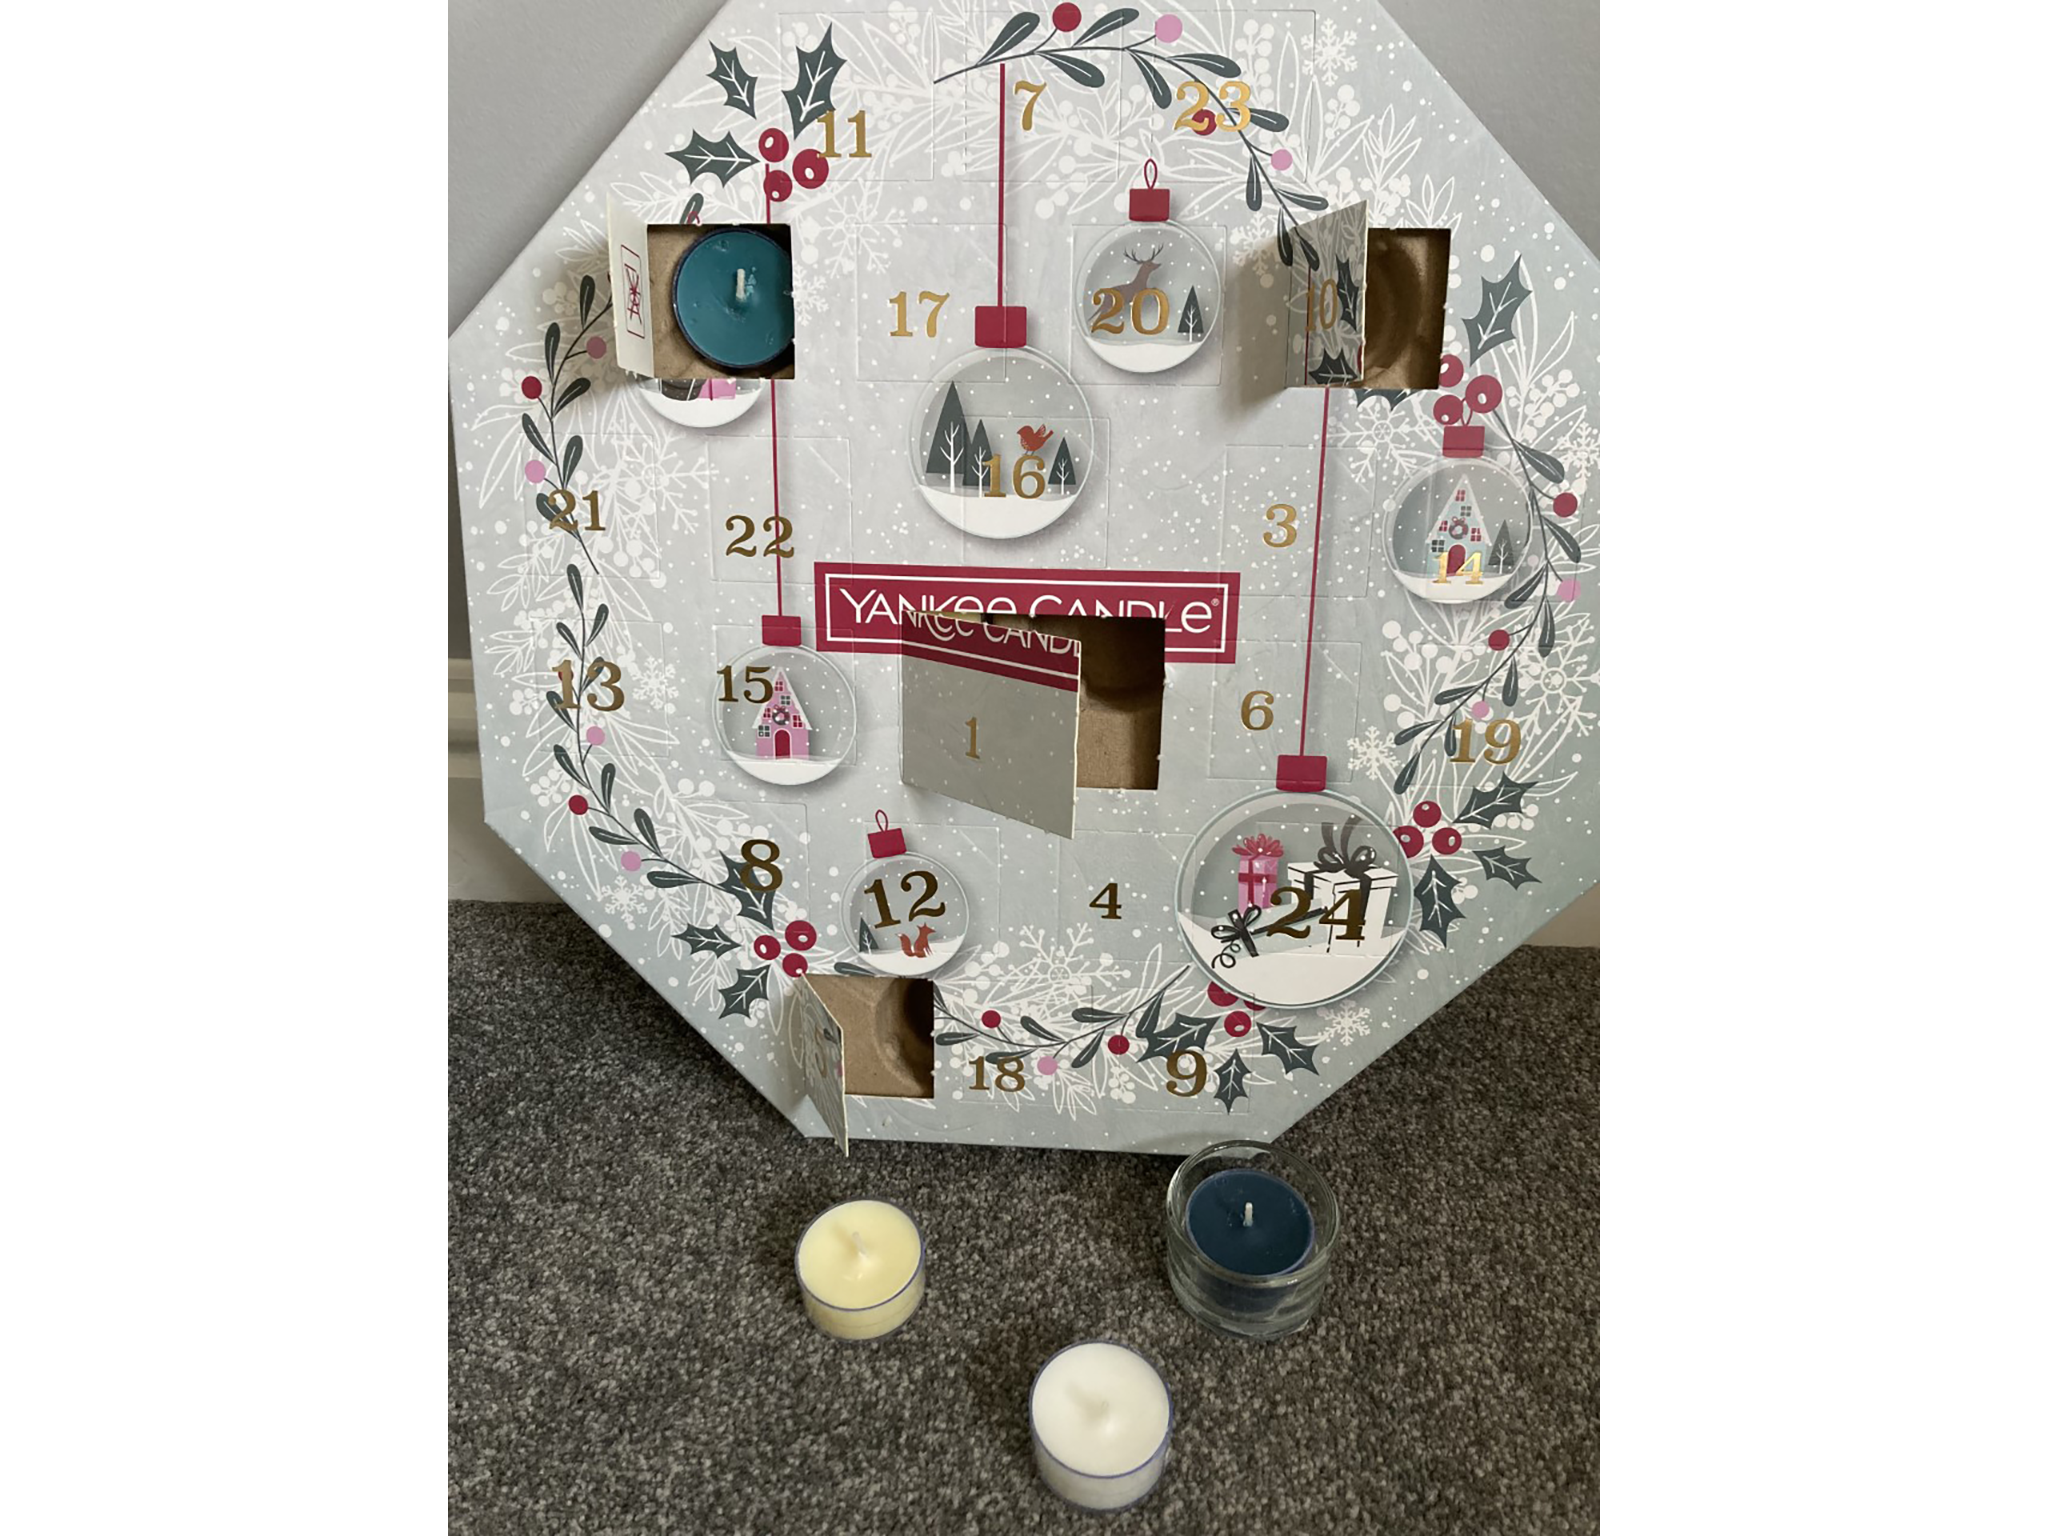 Yankee Candle advent wreath